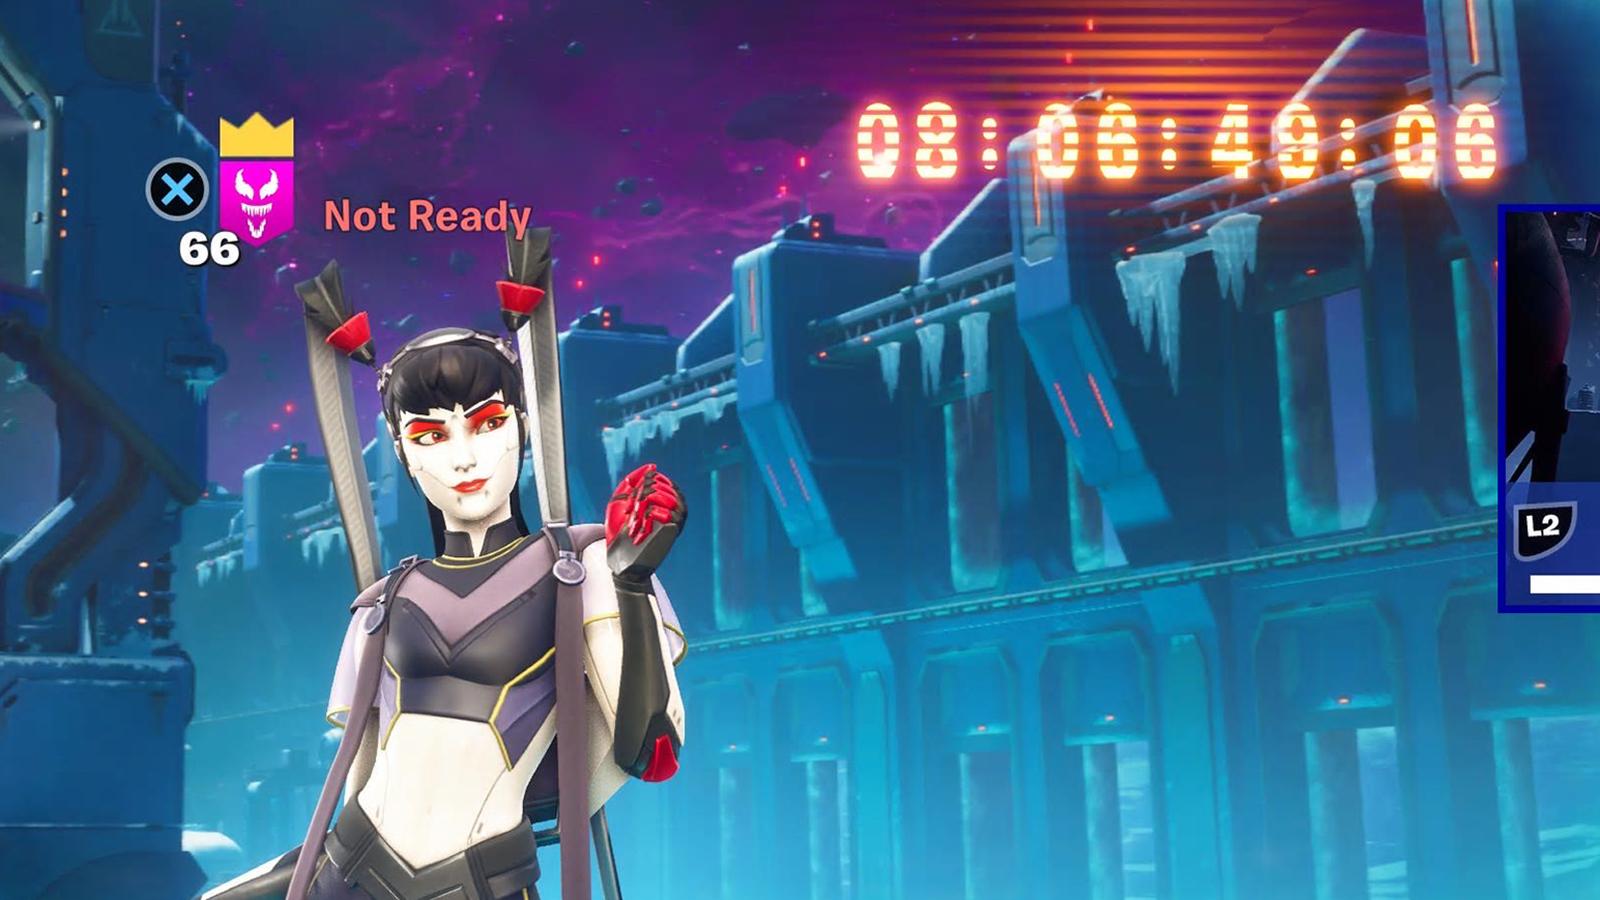 The Fortnite Chapter 3 Season 2 countdown timer in game